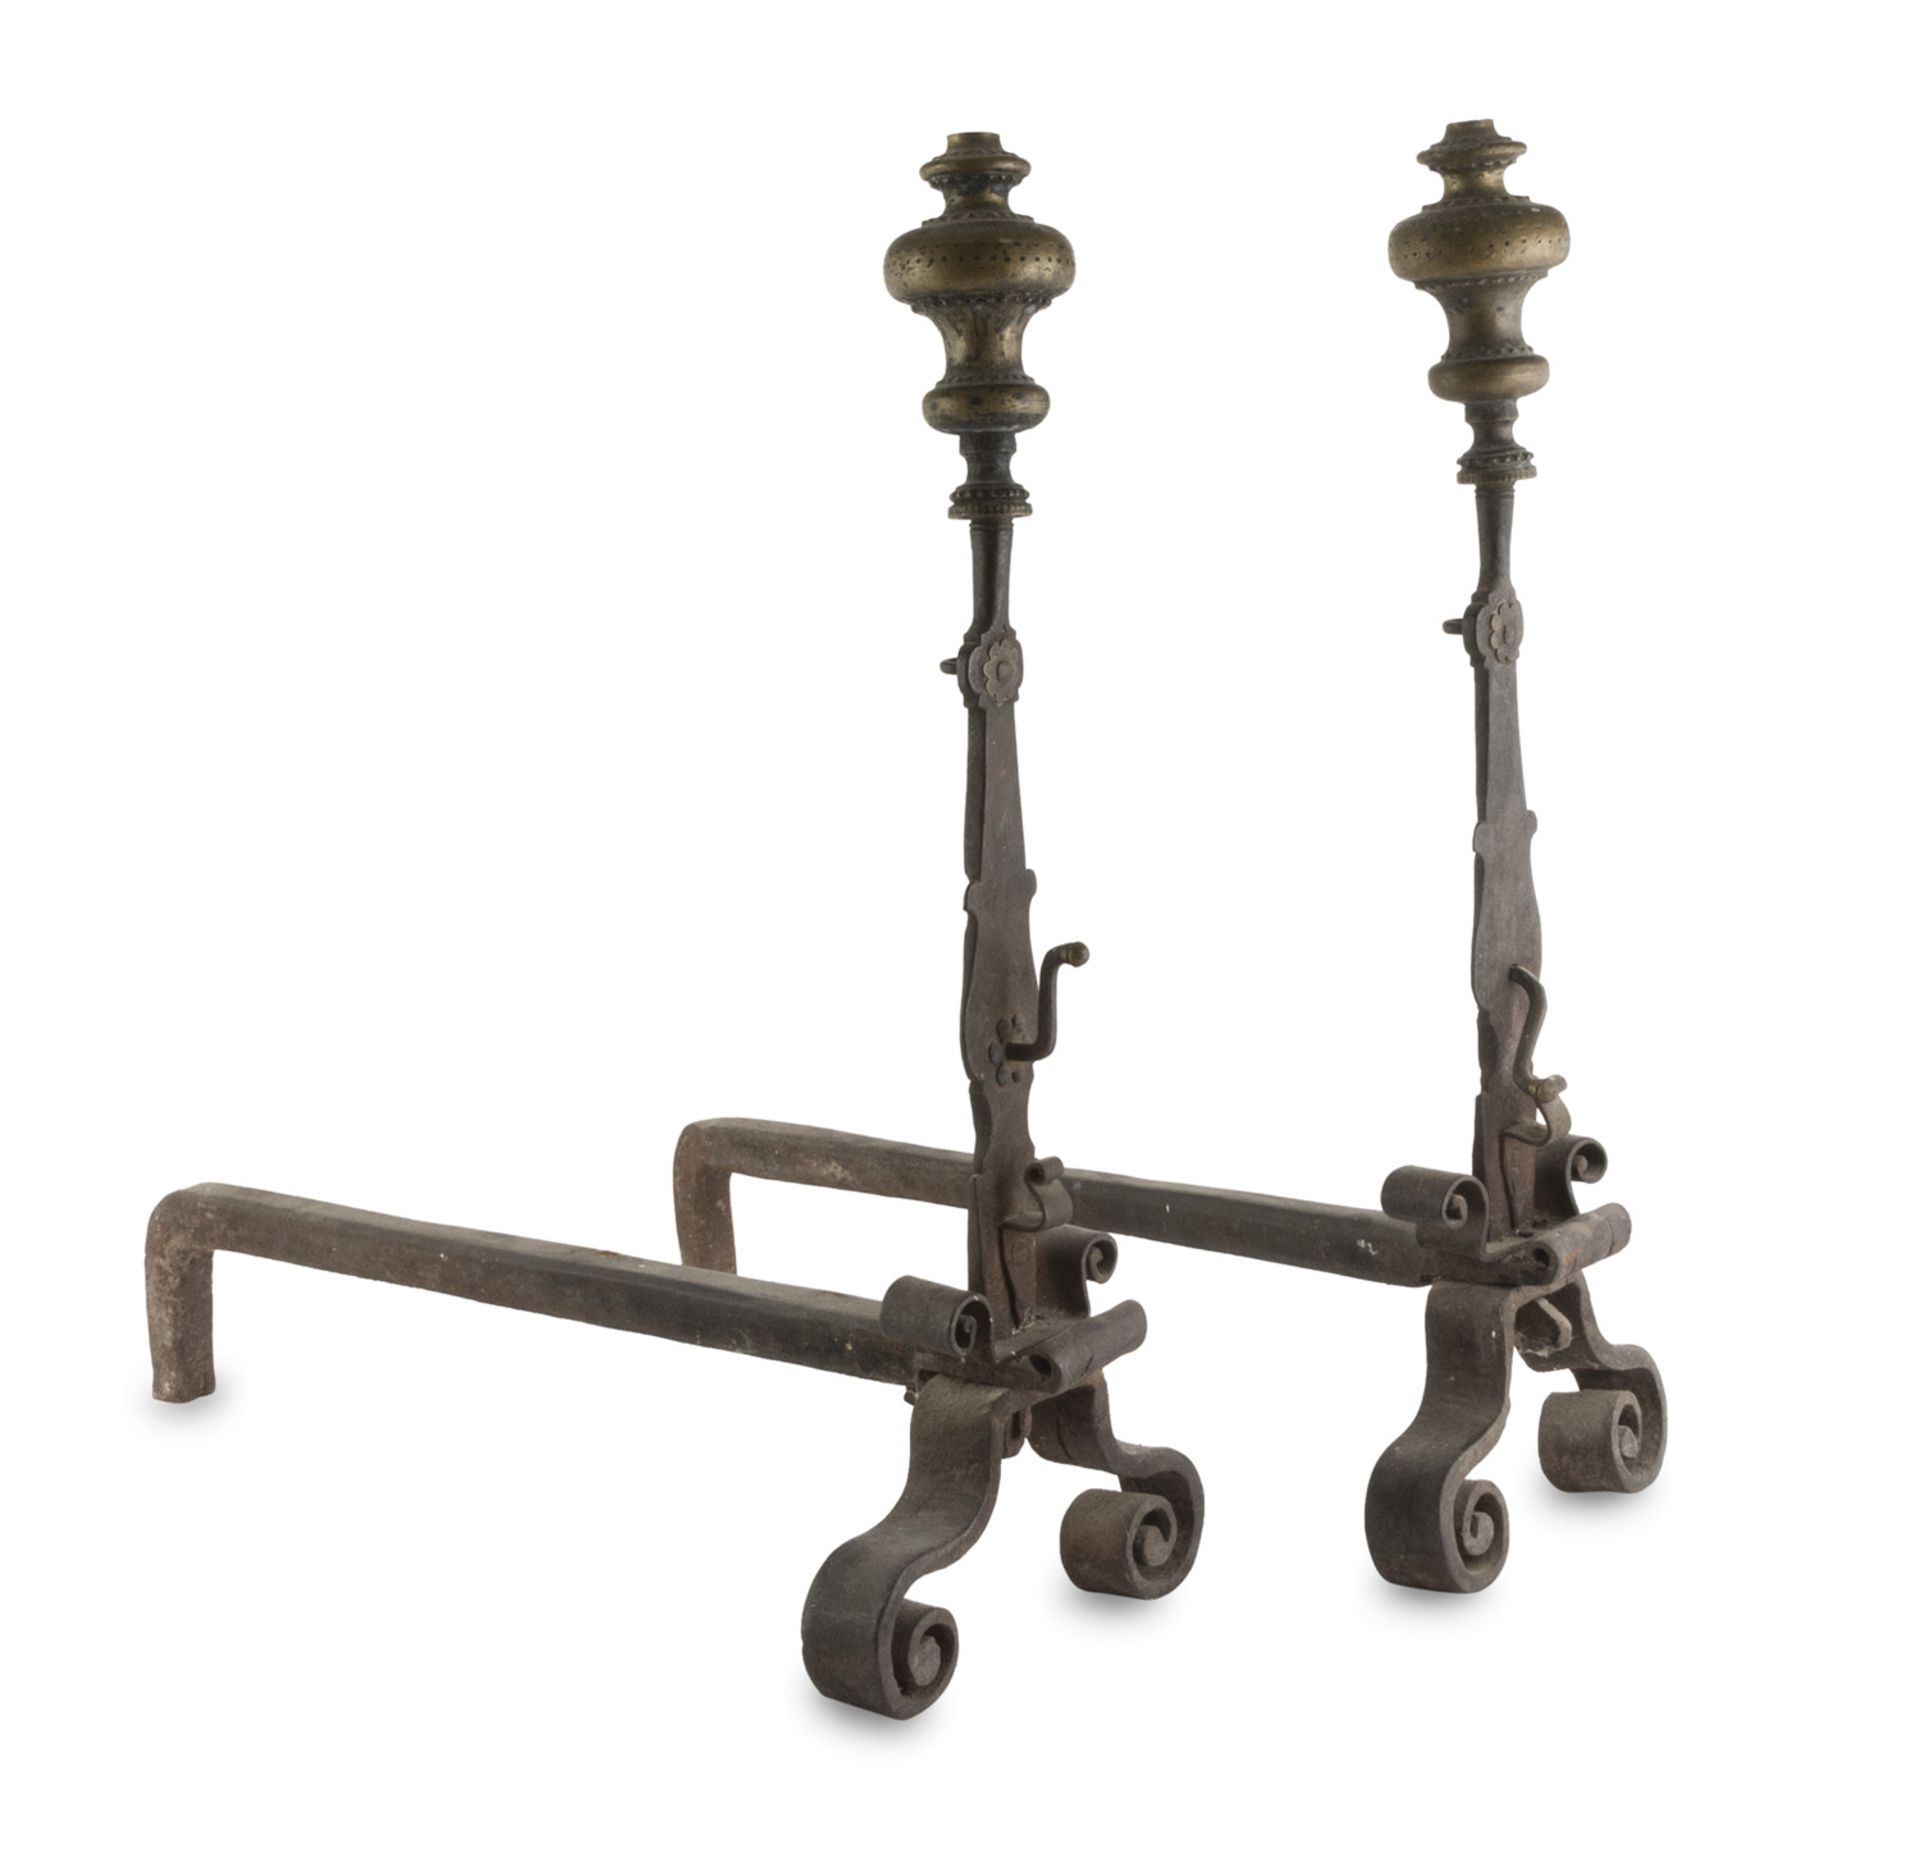 BEAUTIFUL PAIR OF IRON FIREDOGS CENTRAL ITALY 17th CENTURY